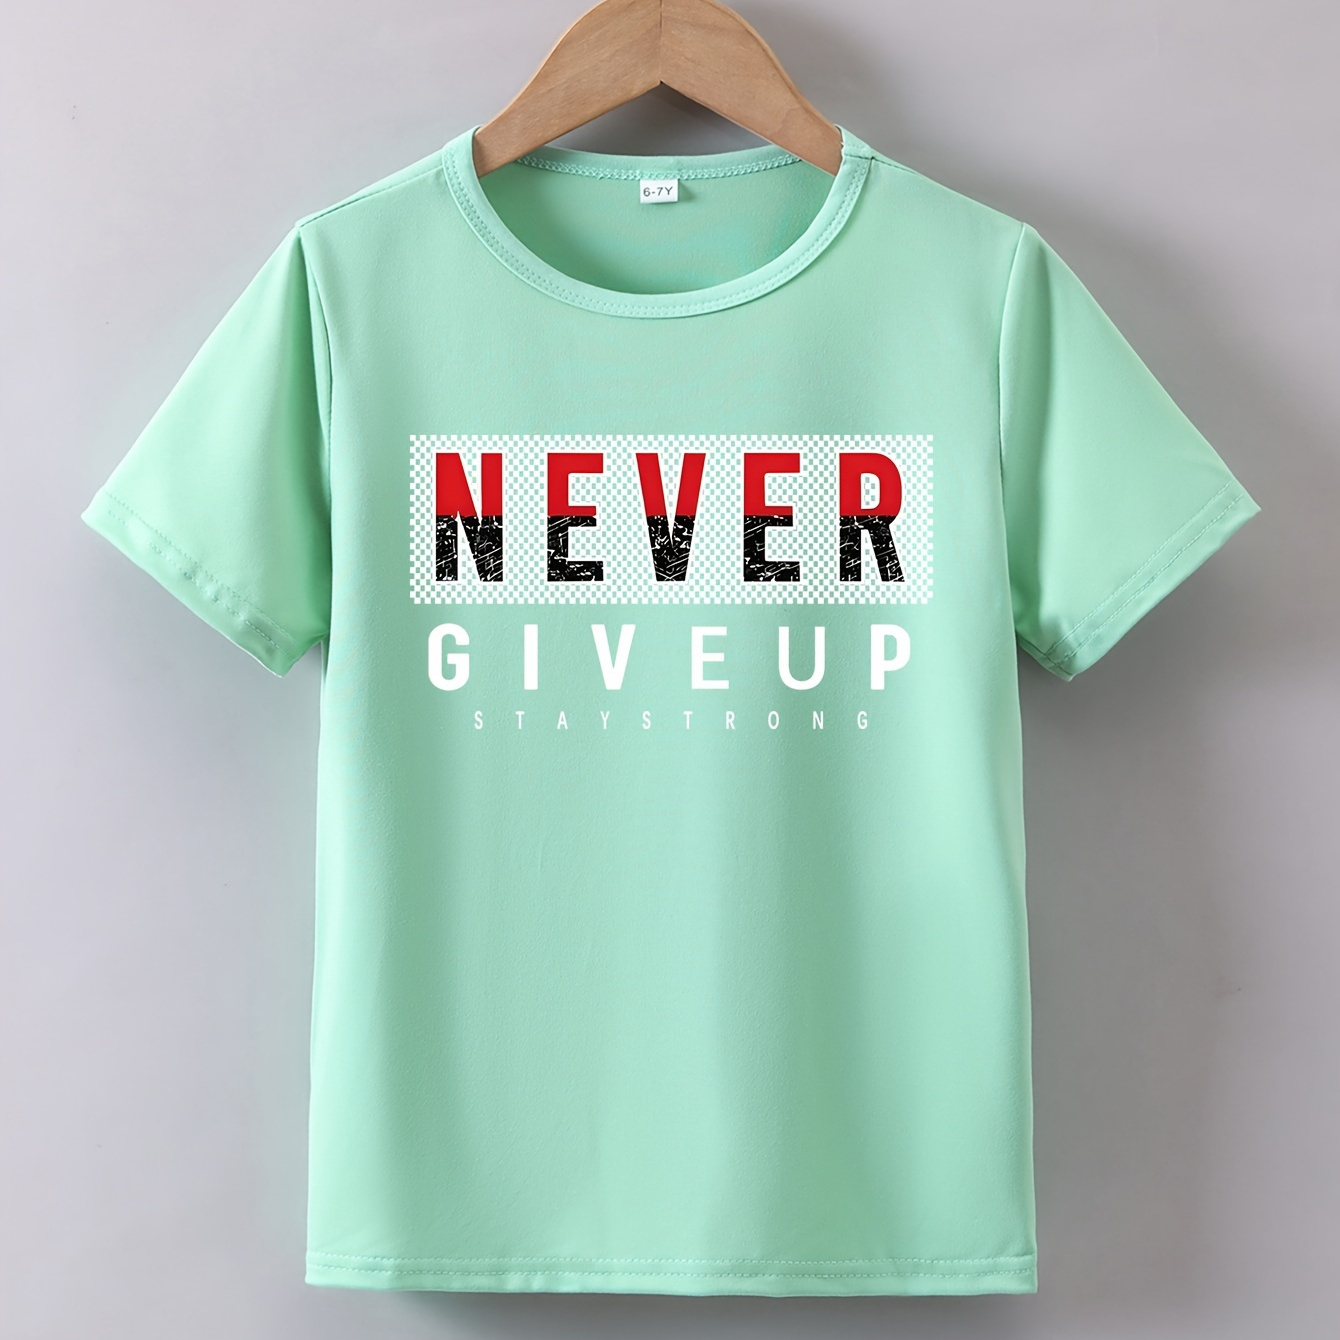 

Never Give Up Print Boy's Crew Neck T-shirt, Short Sleeve Comfy Versatile Tee Tops, Summer Casual Clothing